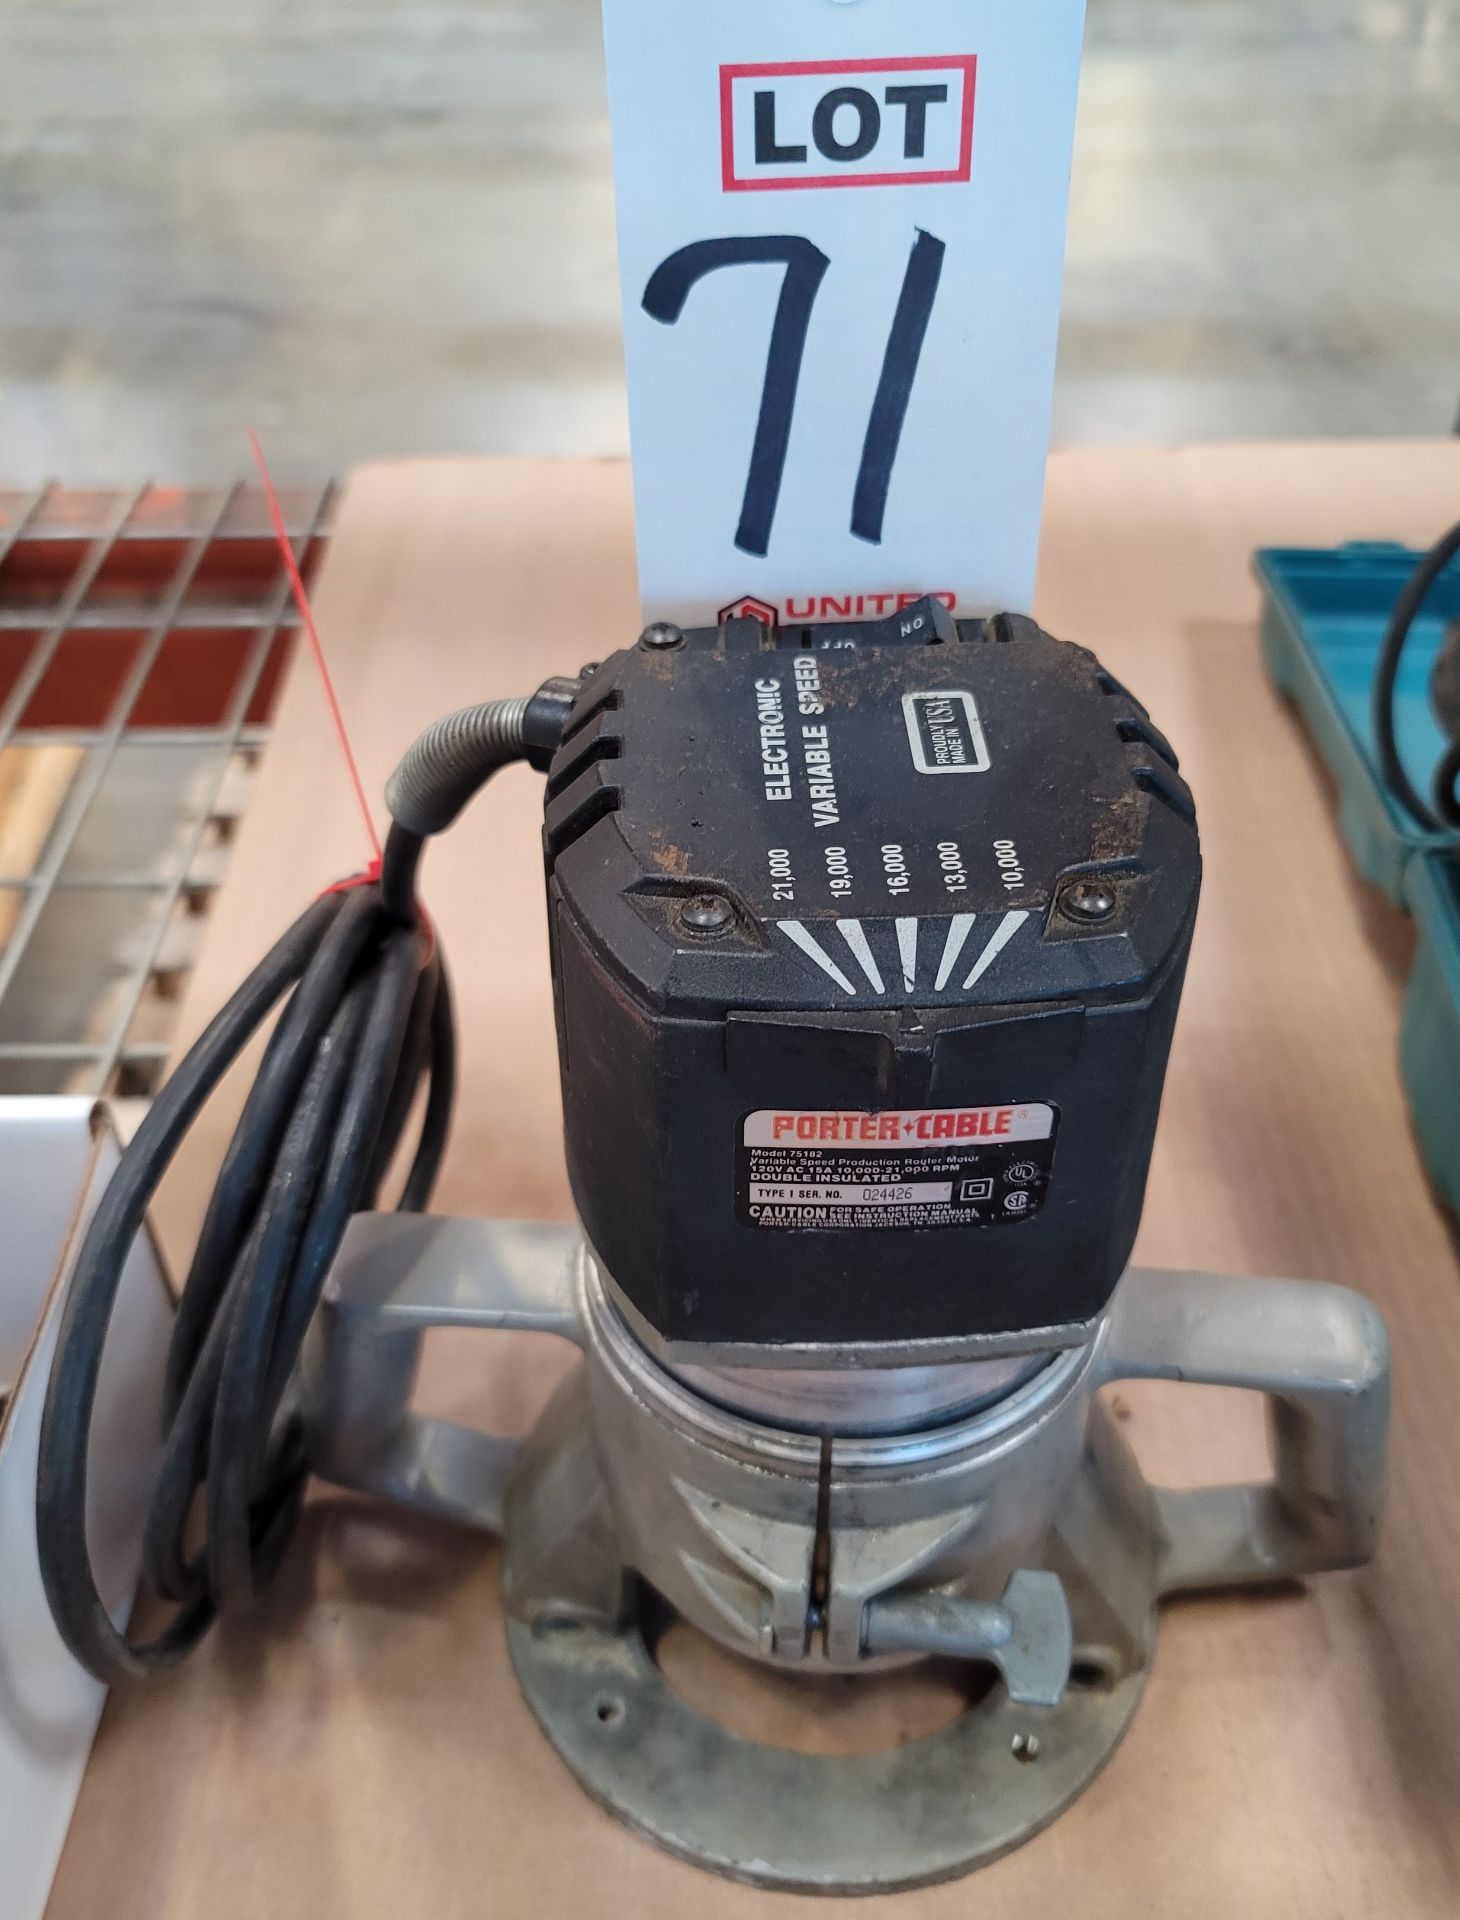 PORTER CABLE MODEL 75182 VARIABLE SPEED PLUNGE ROUTER